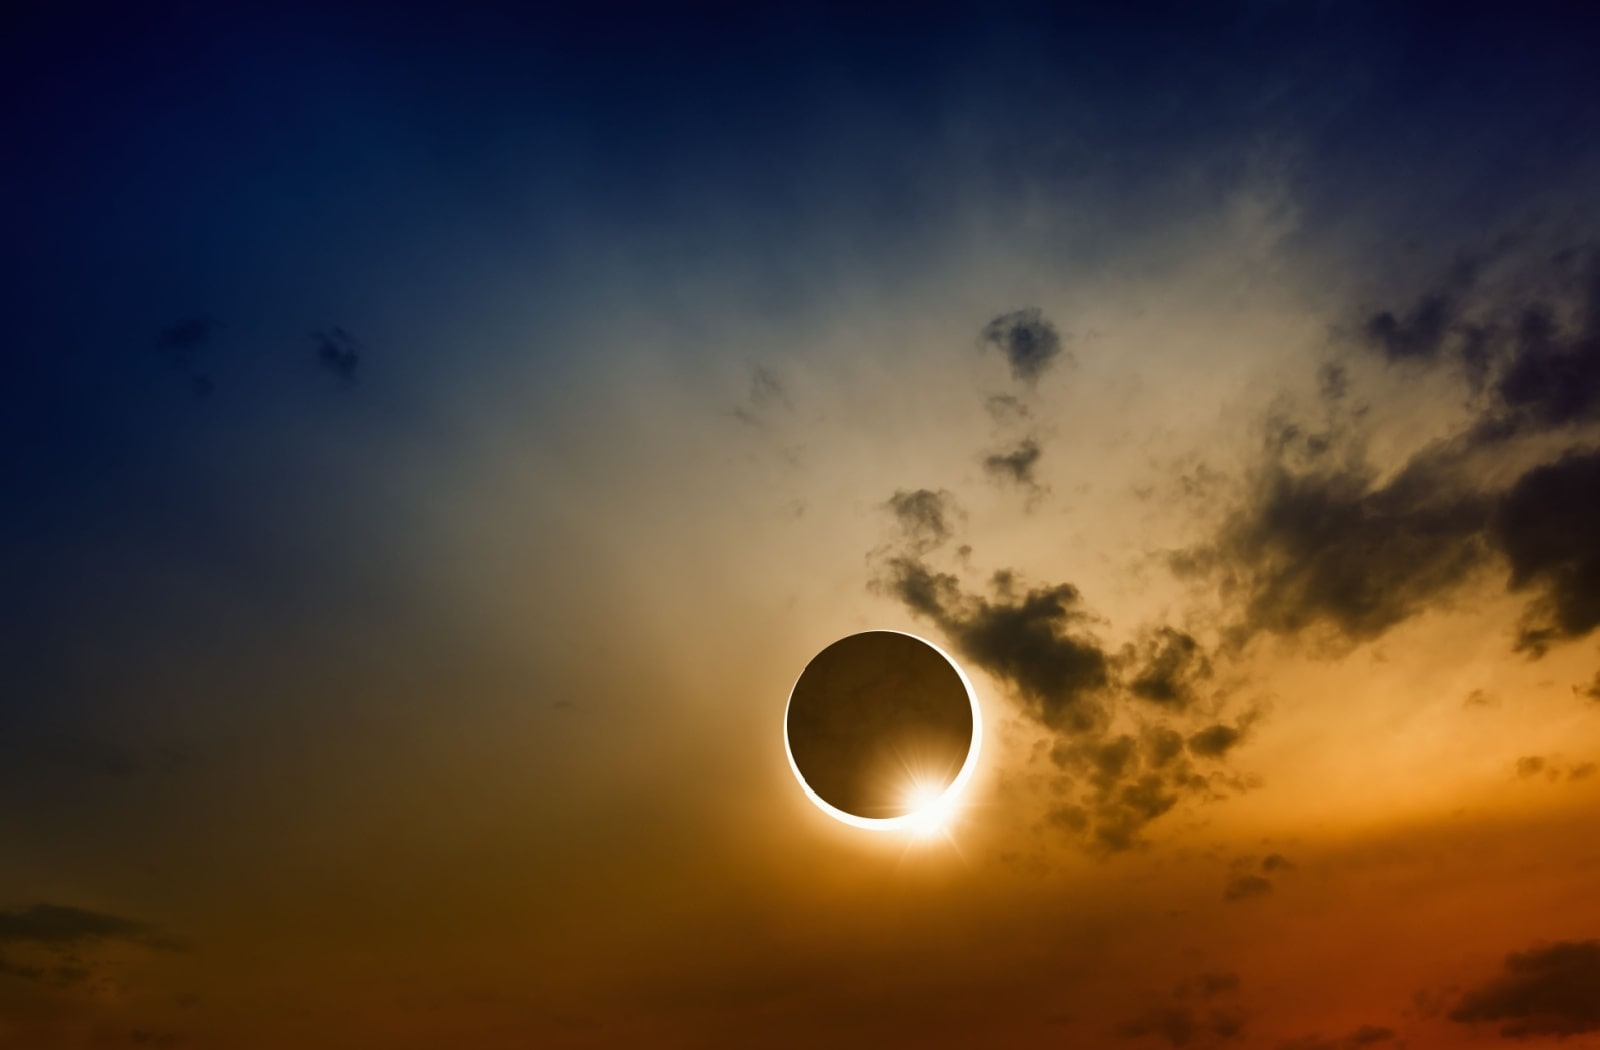 Solar eclipse at twilight with clouds in the sky.